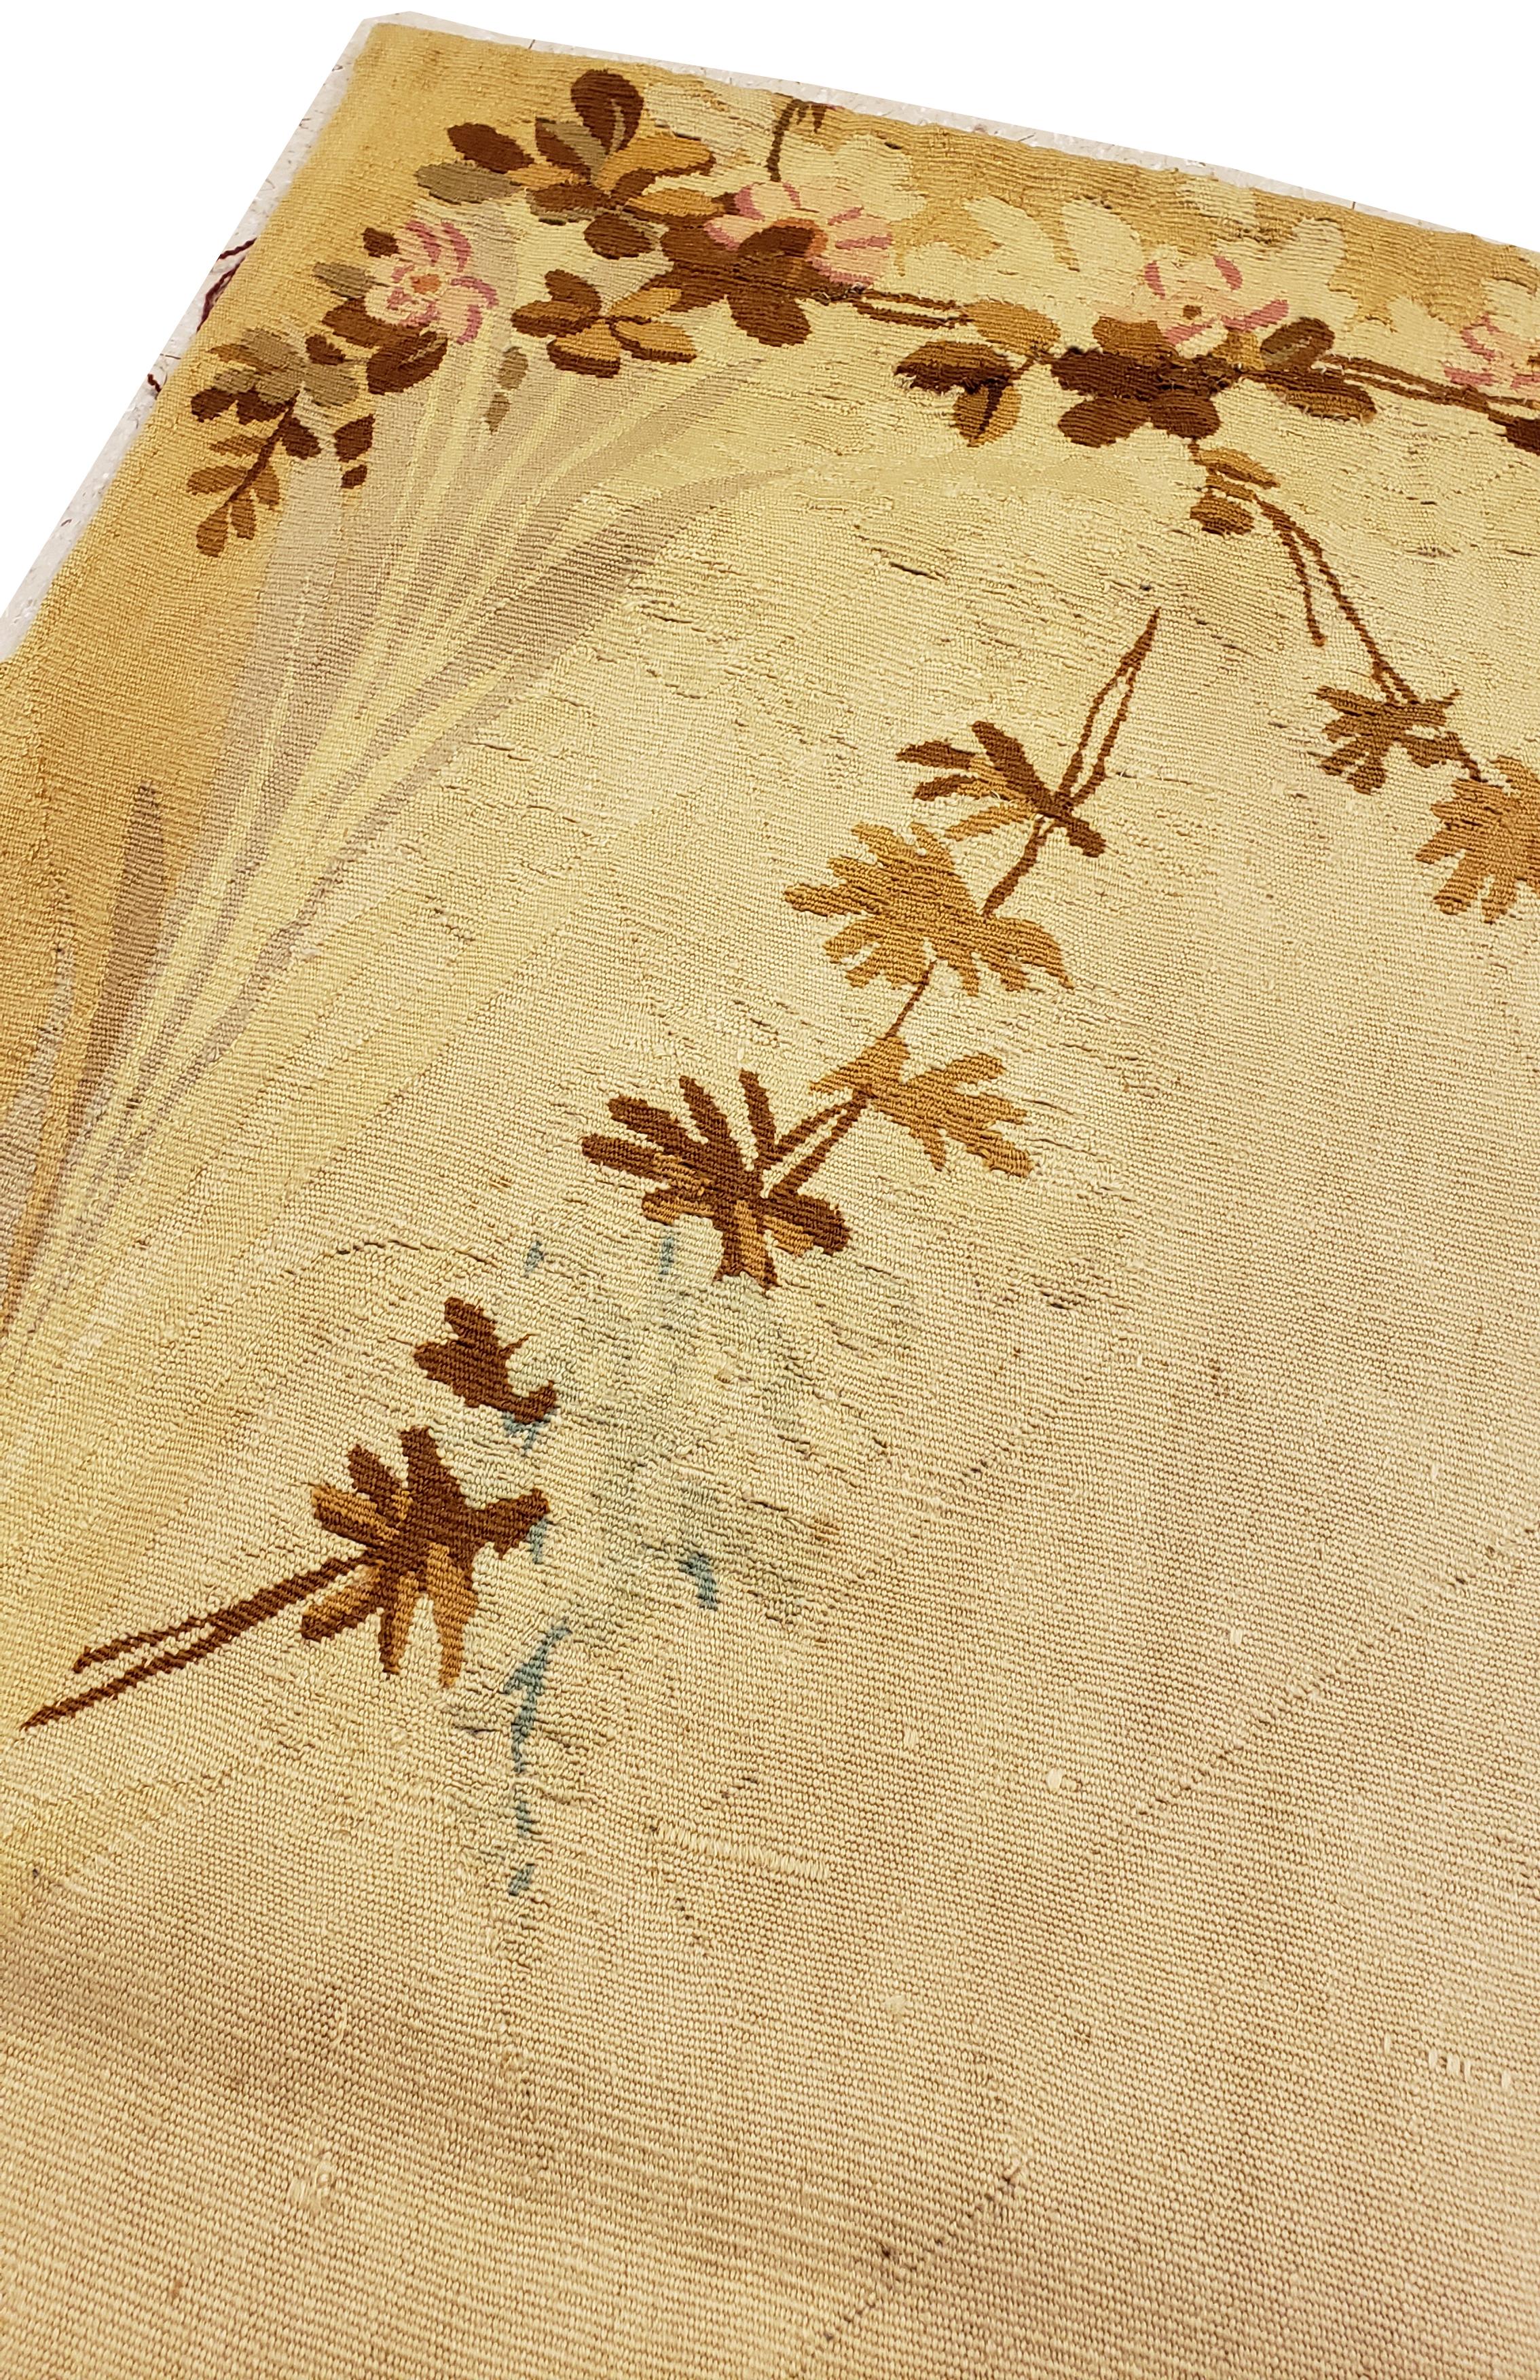 Antique French Tapestry Circa 1900 in Soft Autumnal Colors In Excellent Condition For Sale In Port Washington, NY